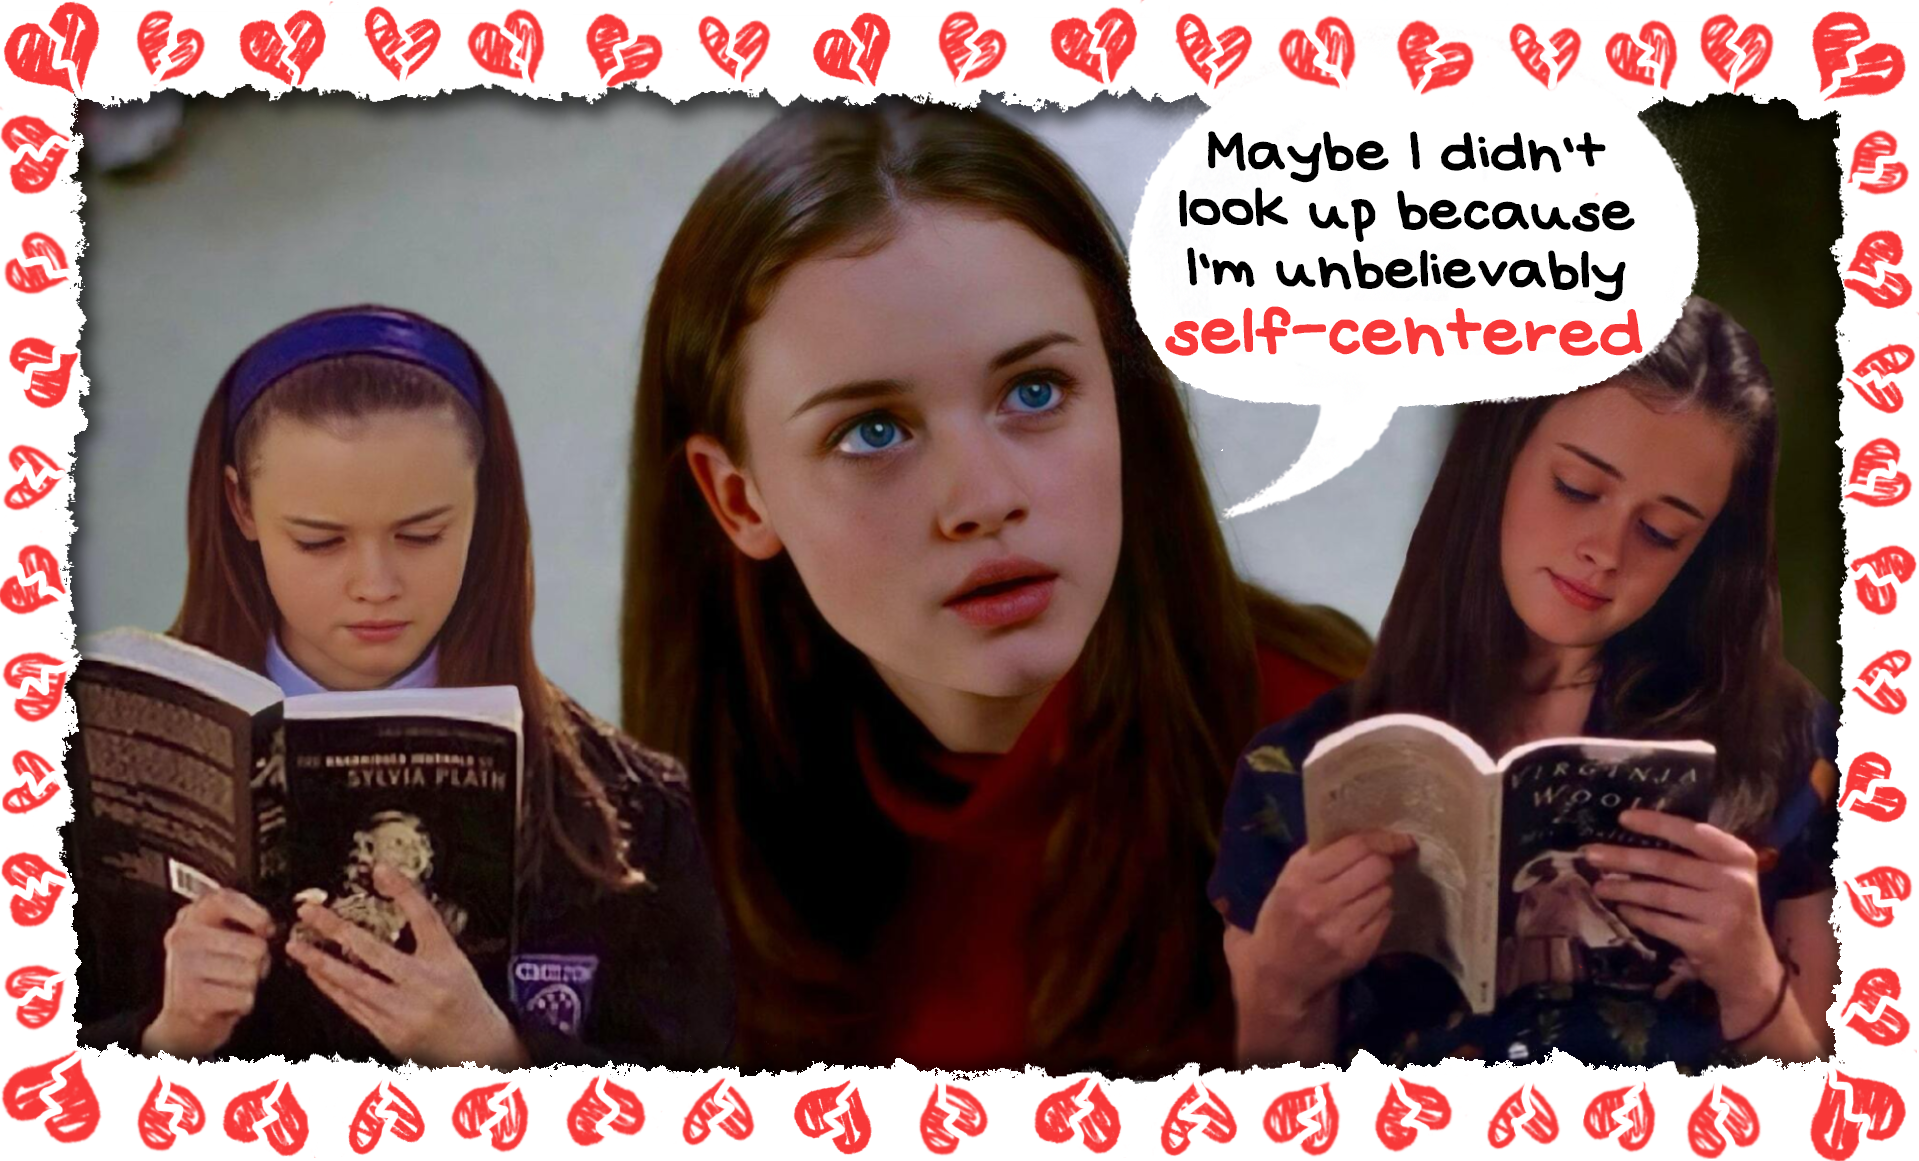 Collage of Rory Gilmore photos with notebook paper, broken heart border. A speech bubble from Rory’s mouth reads “Maybe I didn’t look up because I’m unbelievably self-centered.”